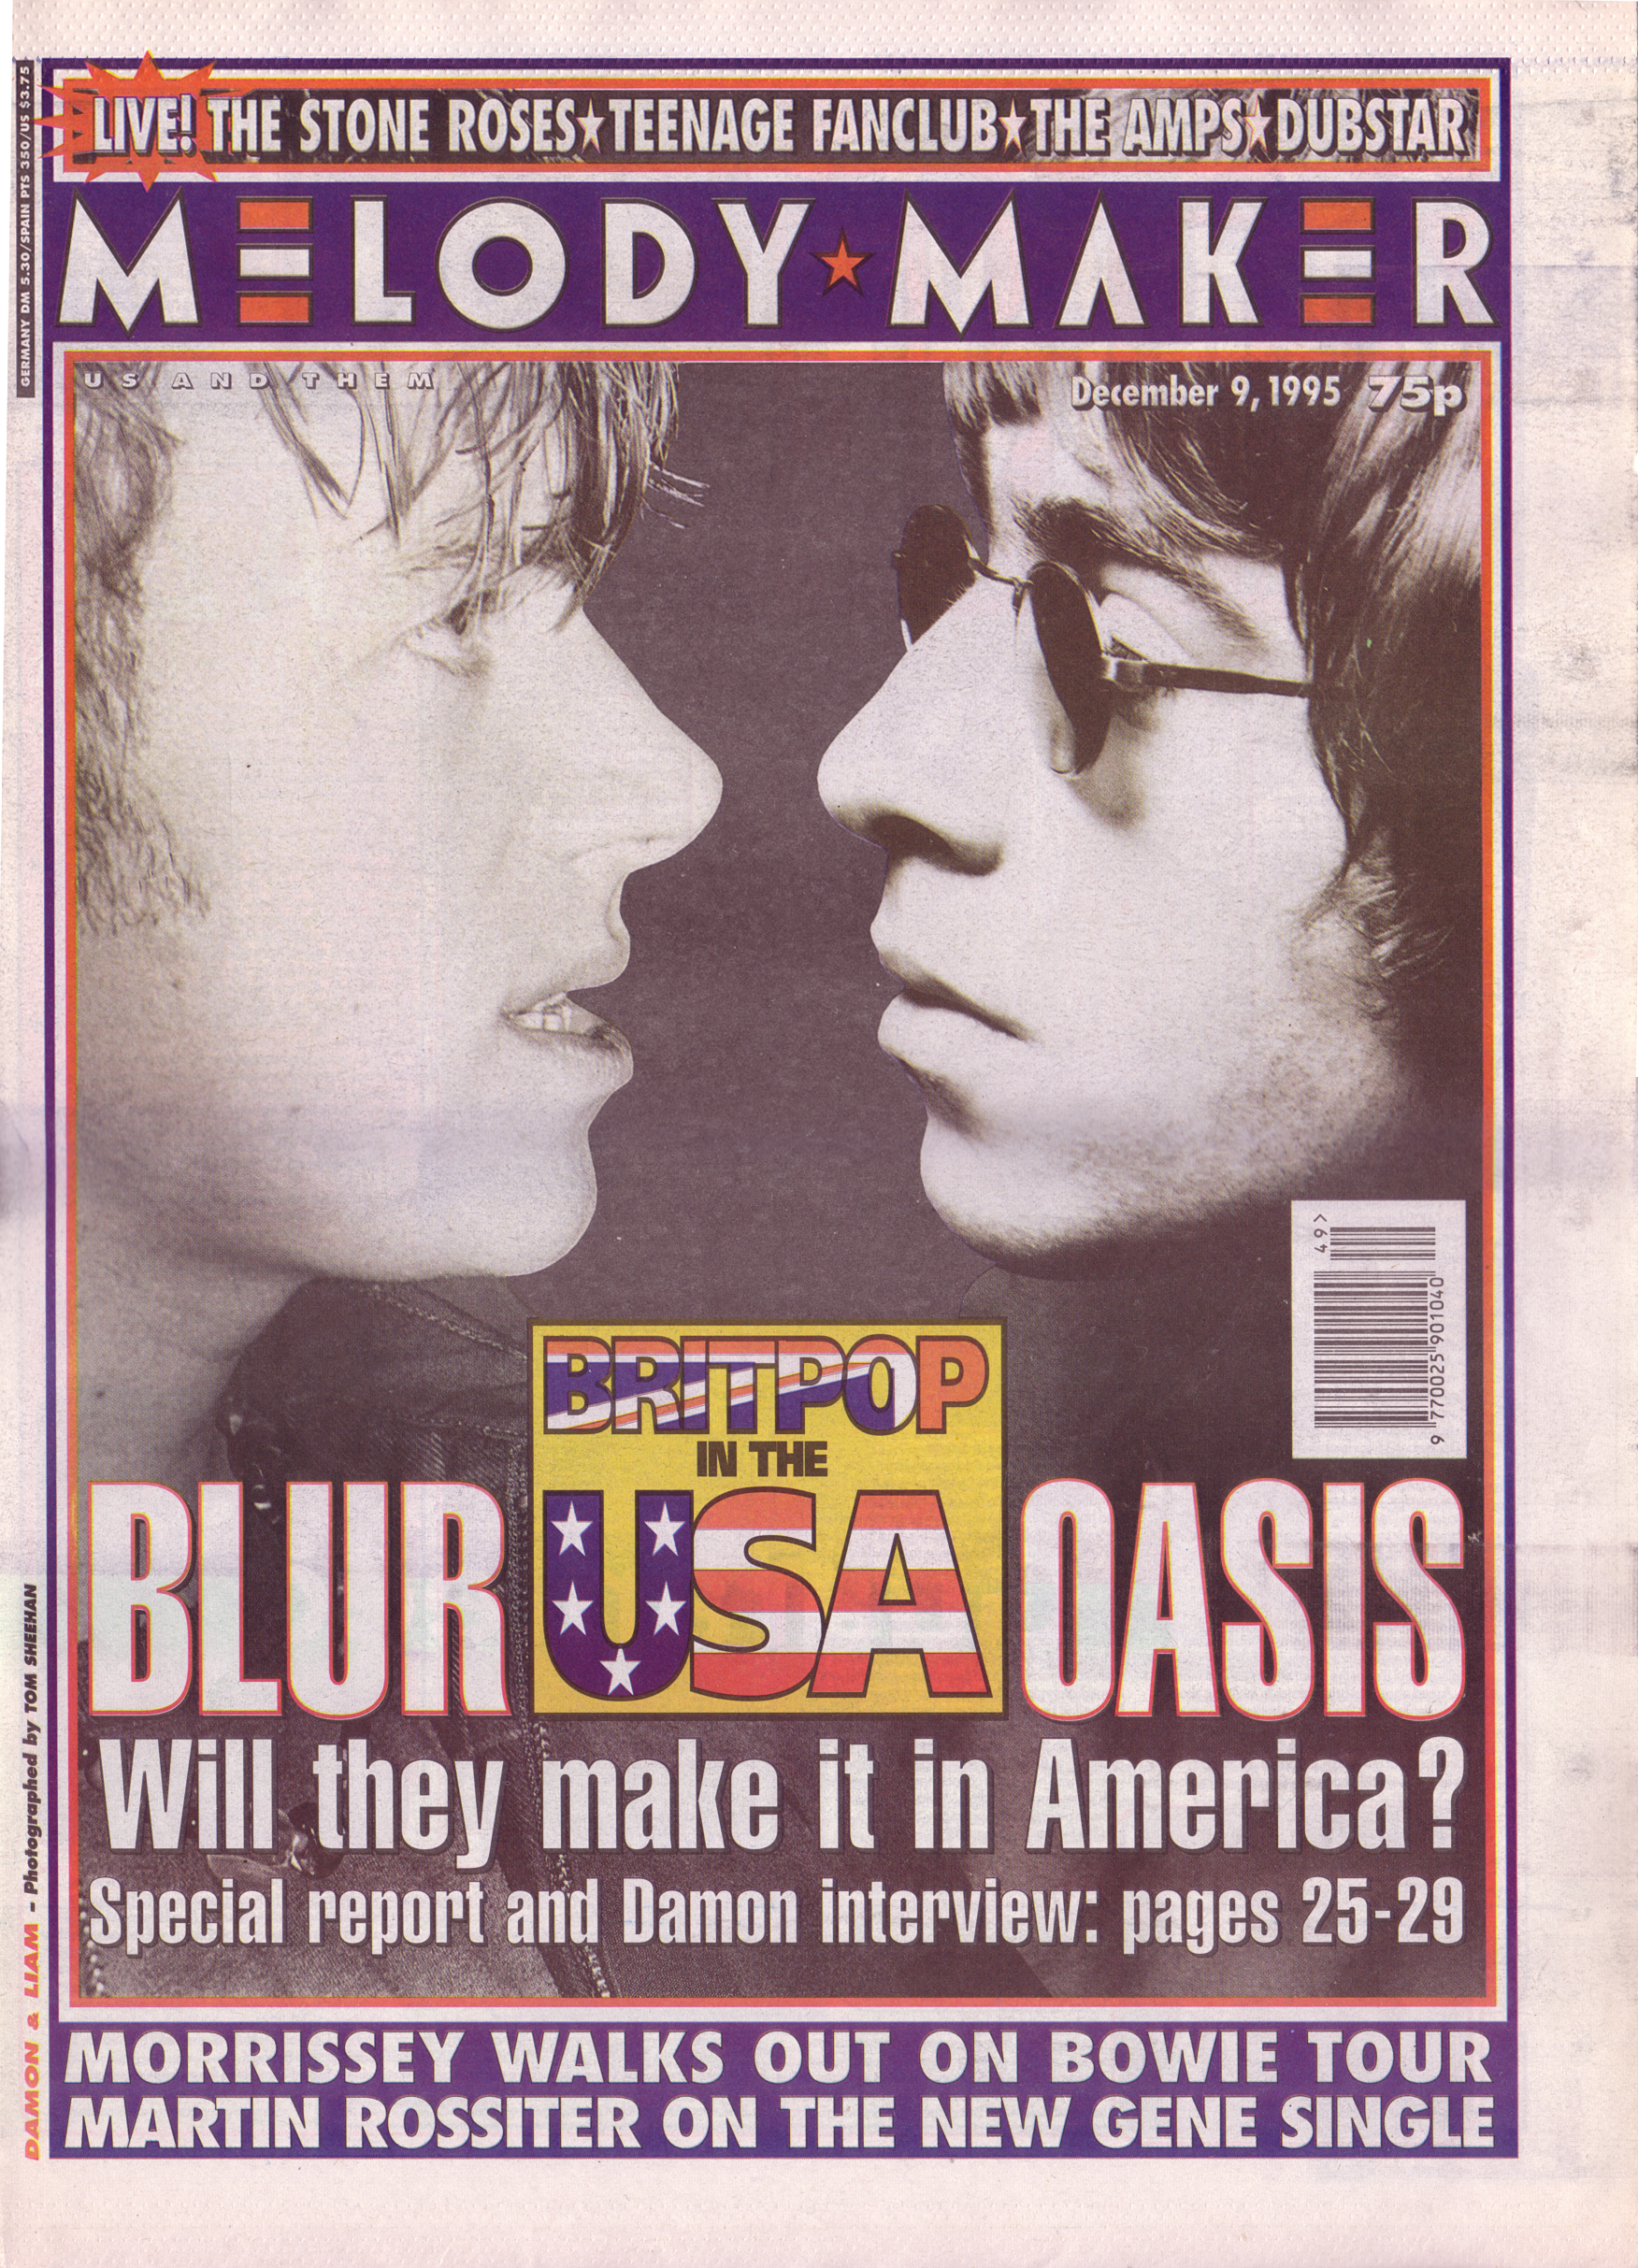 http://archivedmusicpress.files.wordpress.com/2010/03/blur-oasis-on-the-cover-of-melody-maker-9th-december-1995.jpg